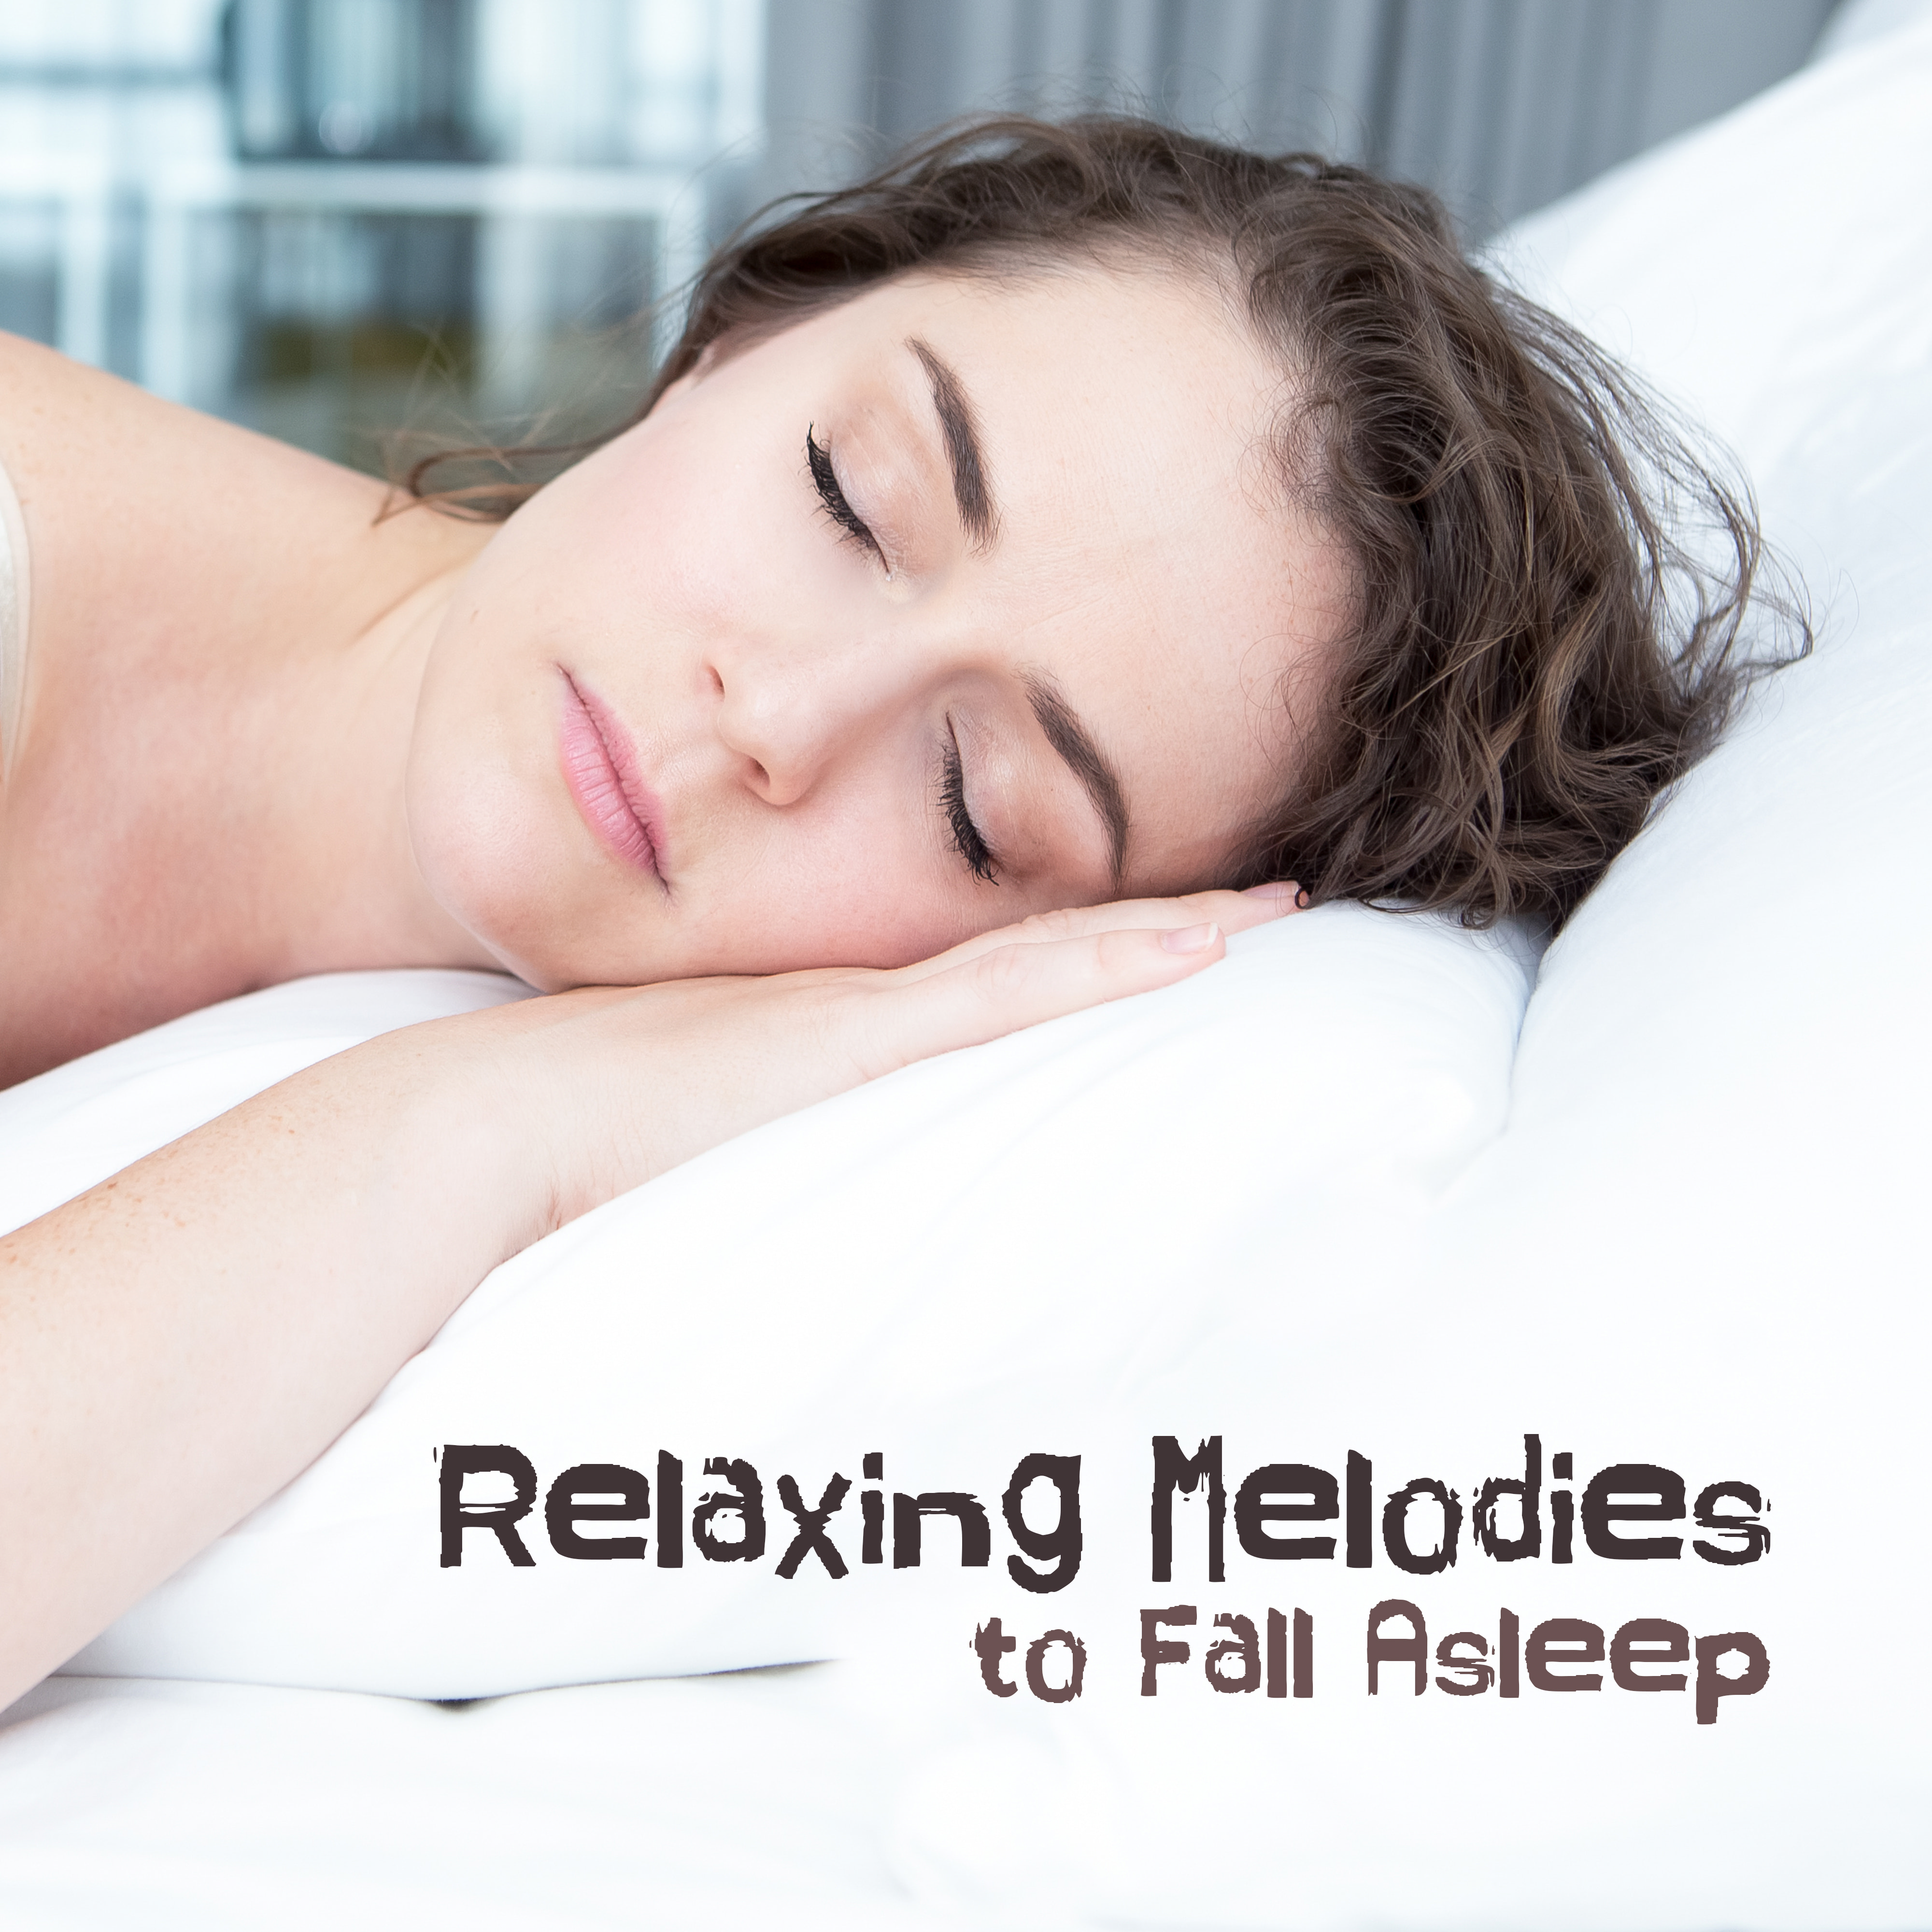 Relaxing Melodies to Fall Asleep